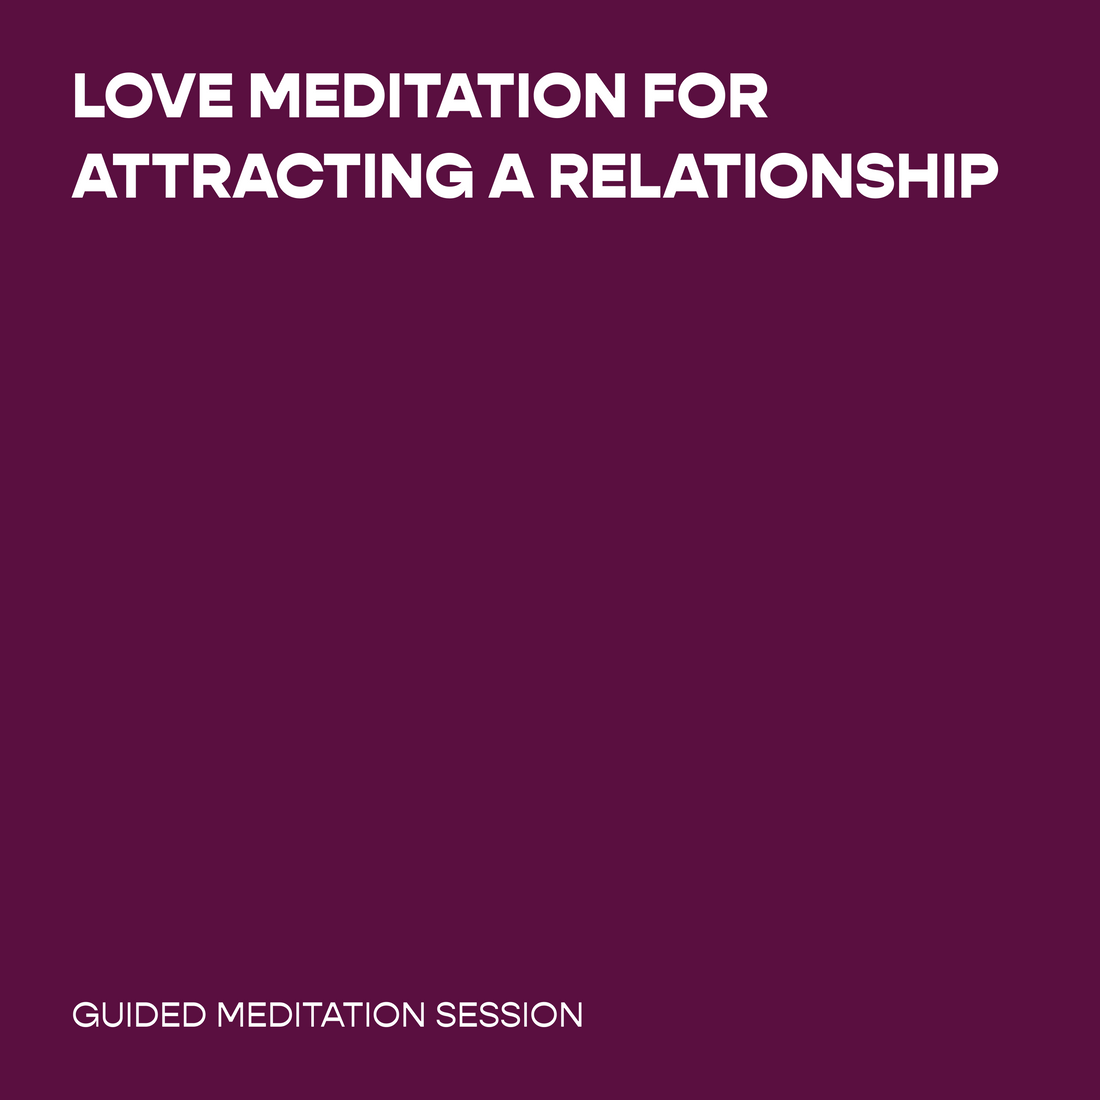 Love Meditation for Attracting a Relationship